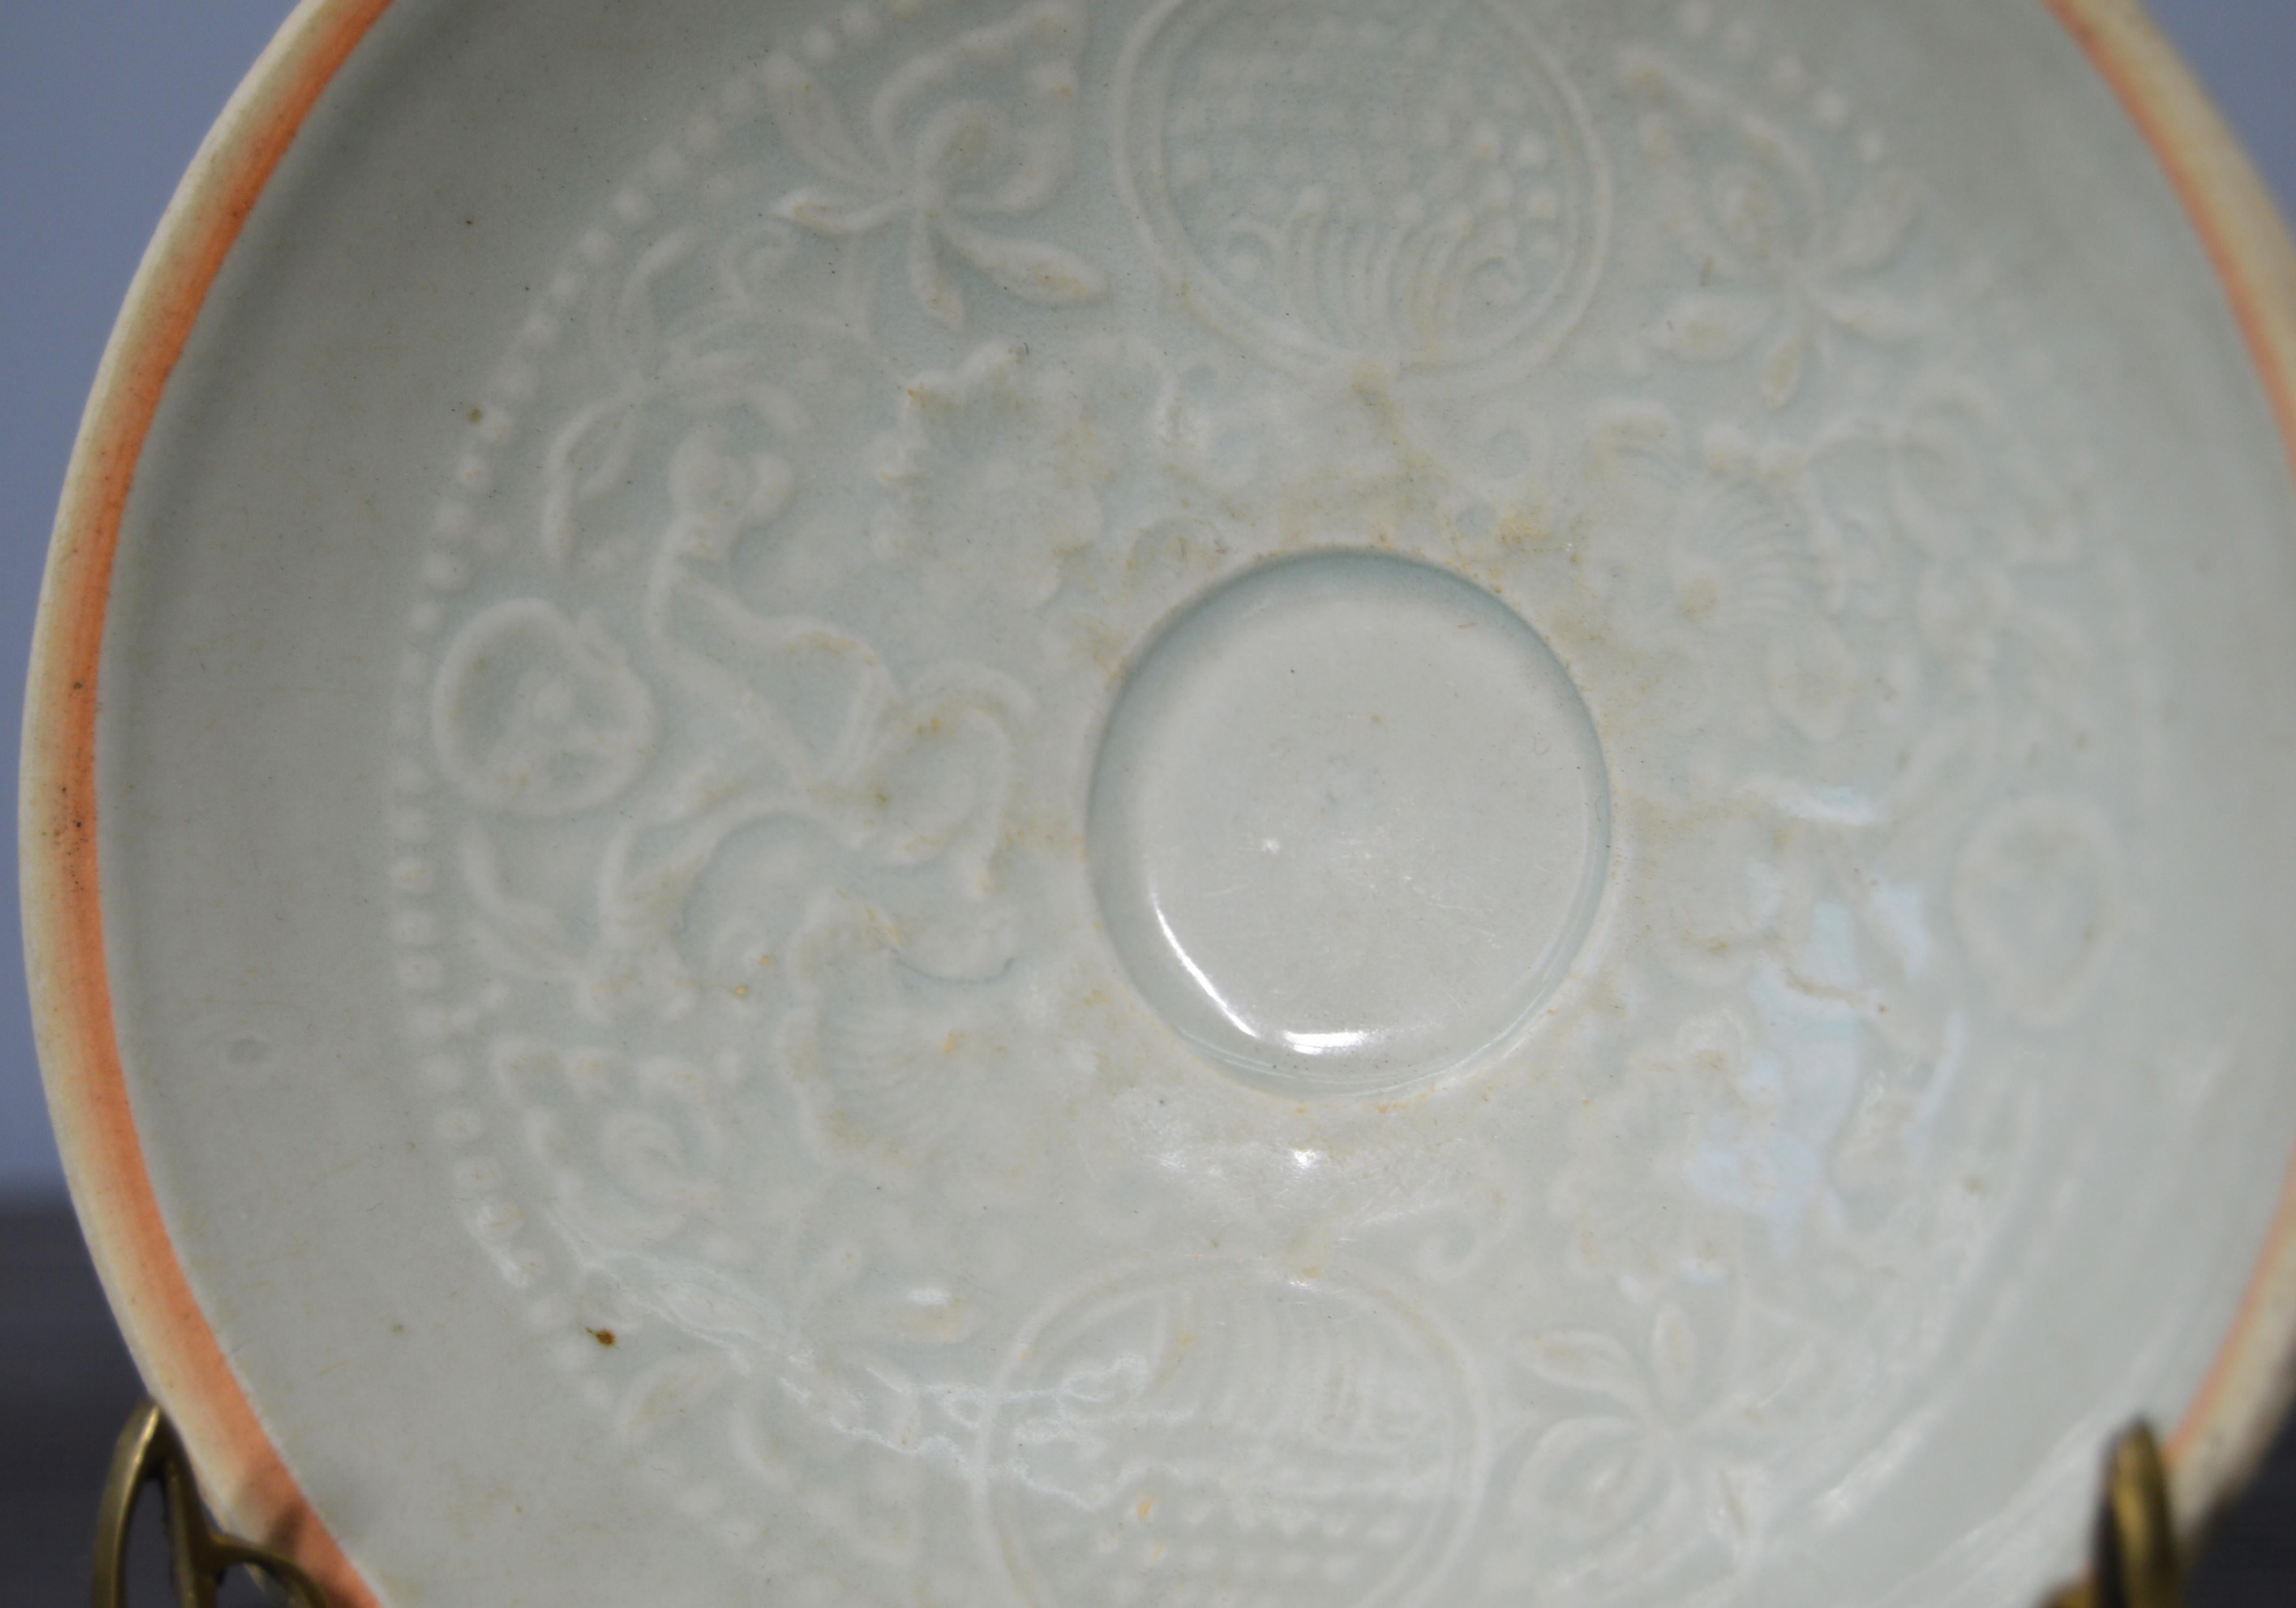 This antique Chinese bowl with intricate motifs was made from celadon porcelain during the Song dynasty: 960–1279. This small Chinese circular bowl adopts a elegant almost conic shape raised on a circular base. The piece displays a pale celadon